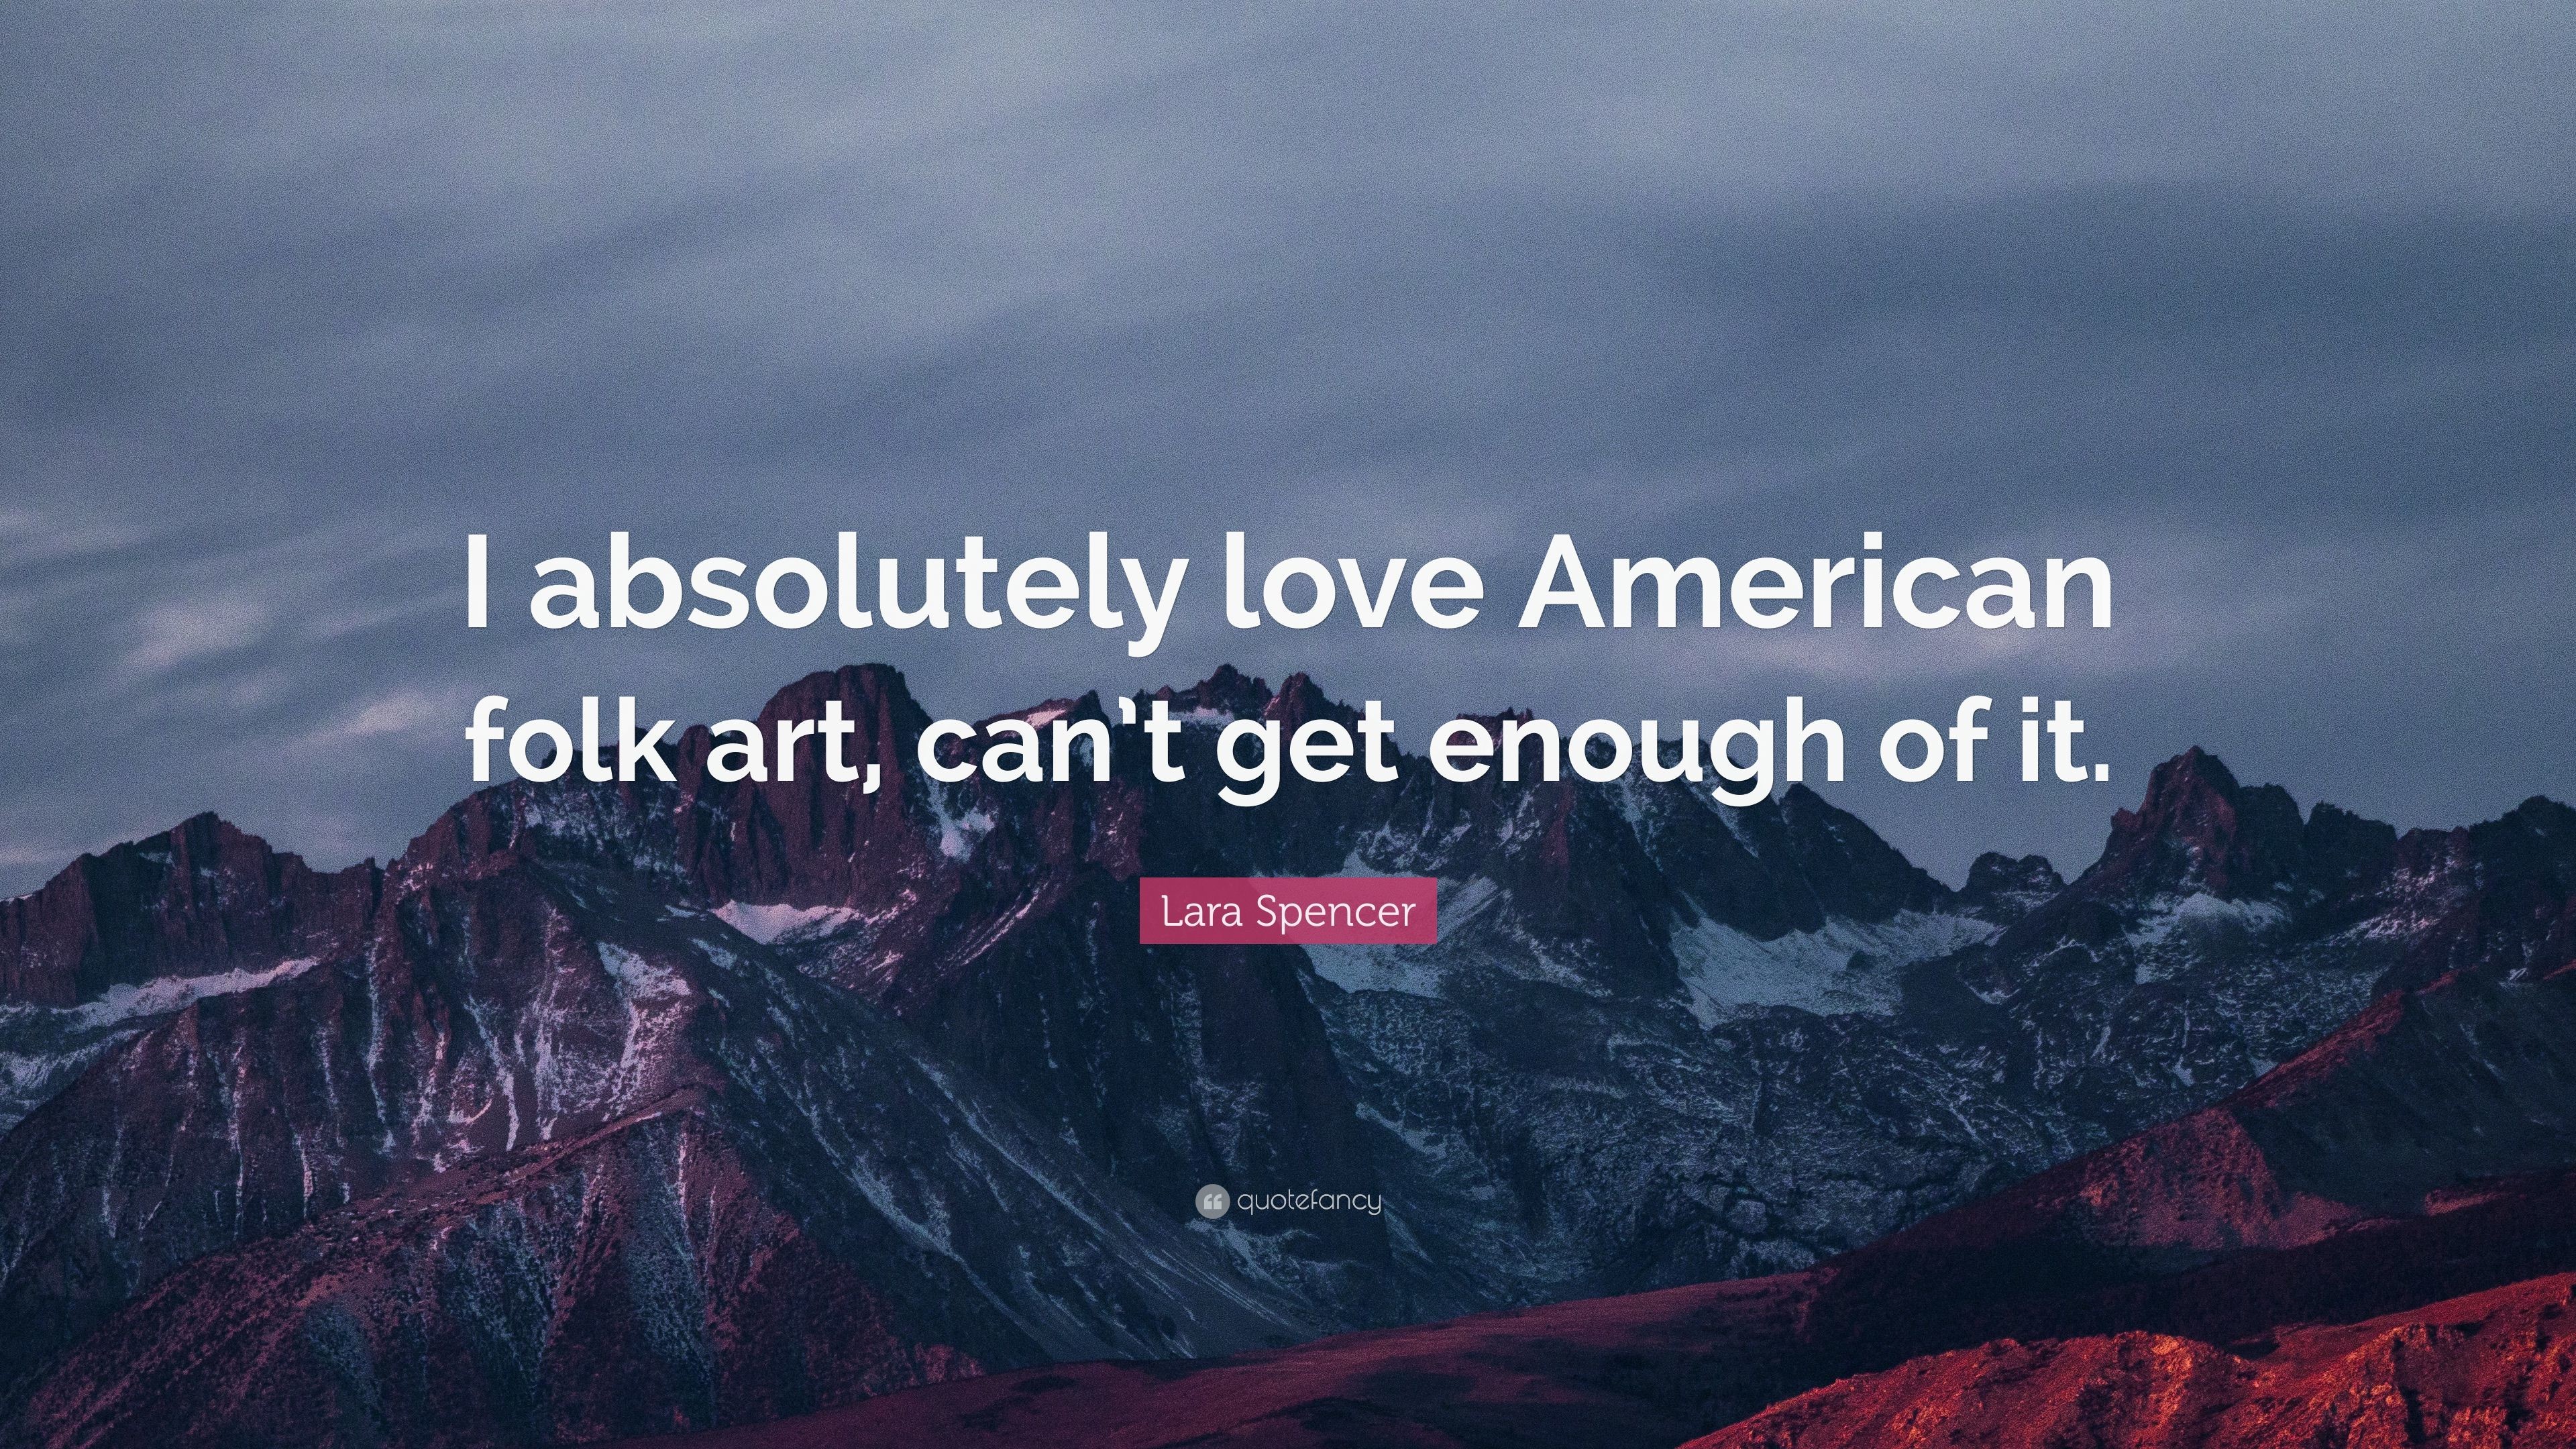 3840x2160 Lara Spencer Quote: “I absolutely love American folk art, can't get